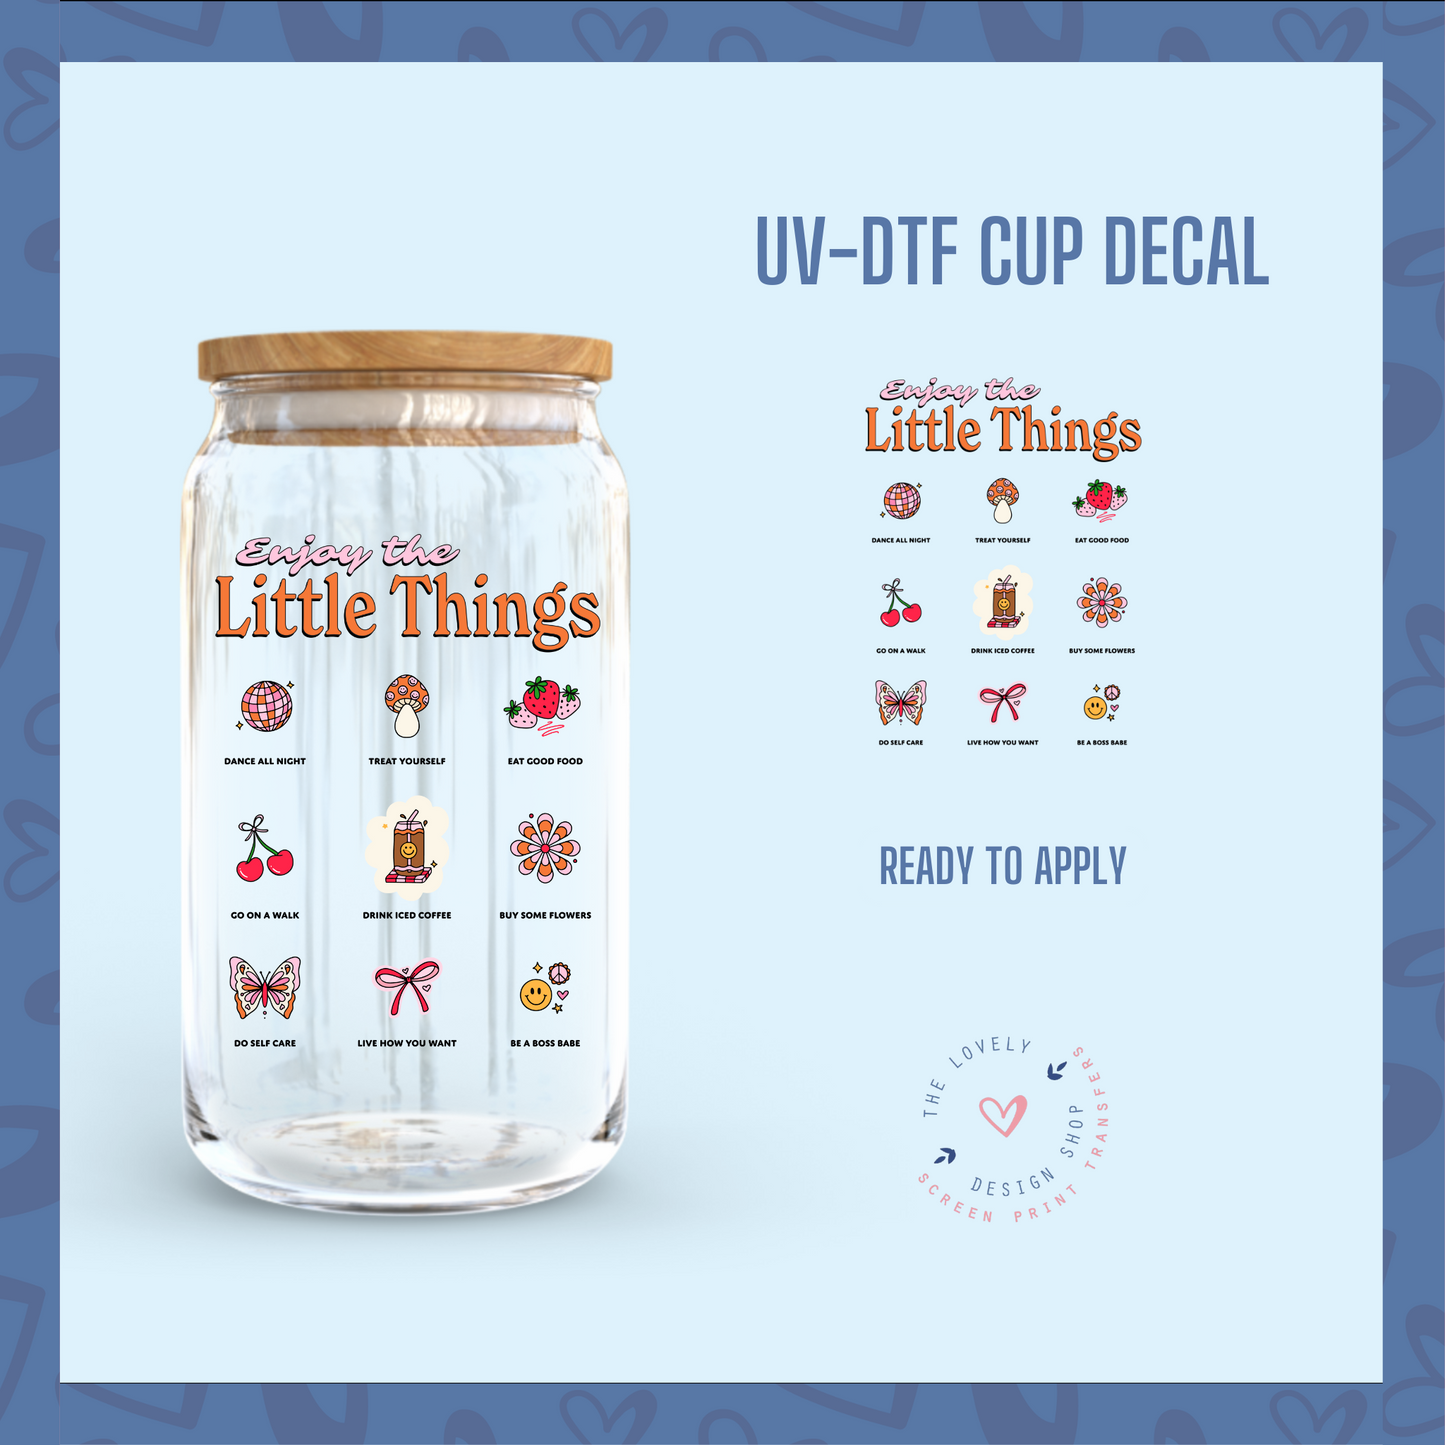 Enjoy The Little Things - UV DTF Cup Decal (Ready to Ship) Feb 27